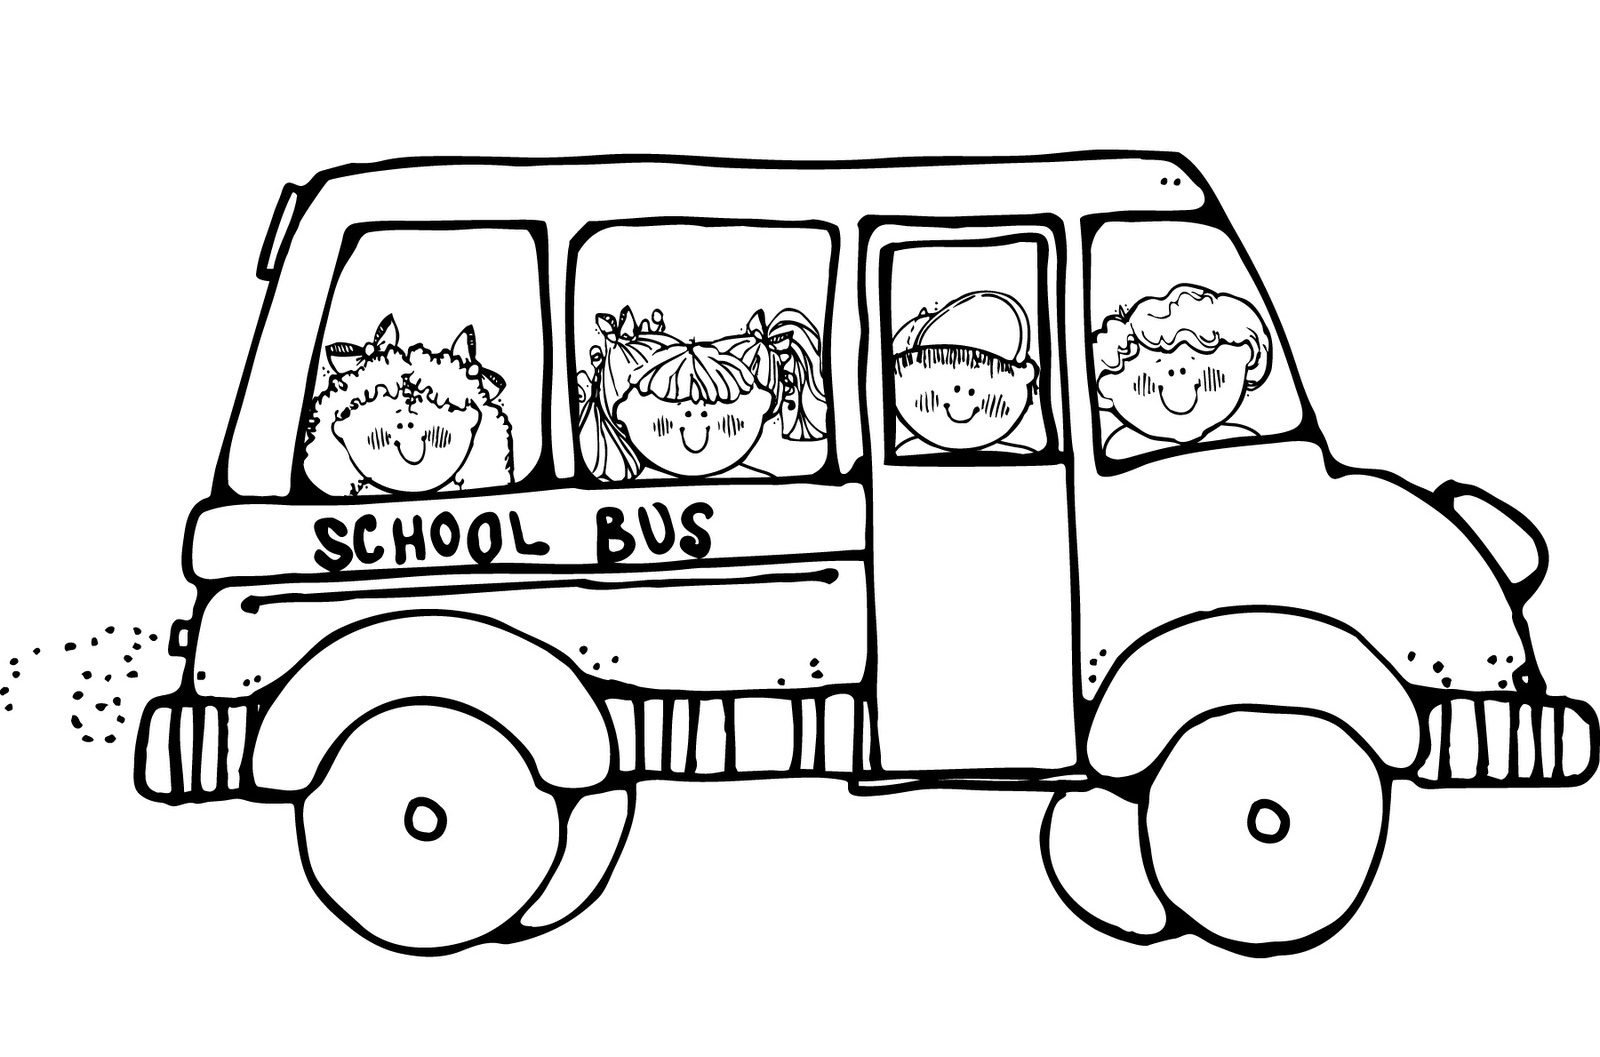 17-buster-the-bus-coloring-pages-free-printable-coloring-pages